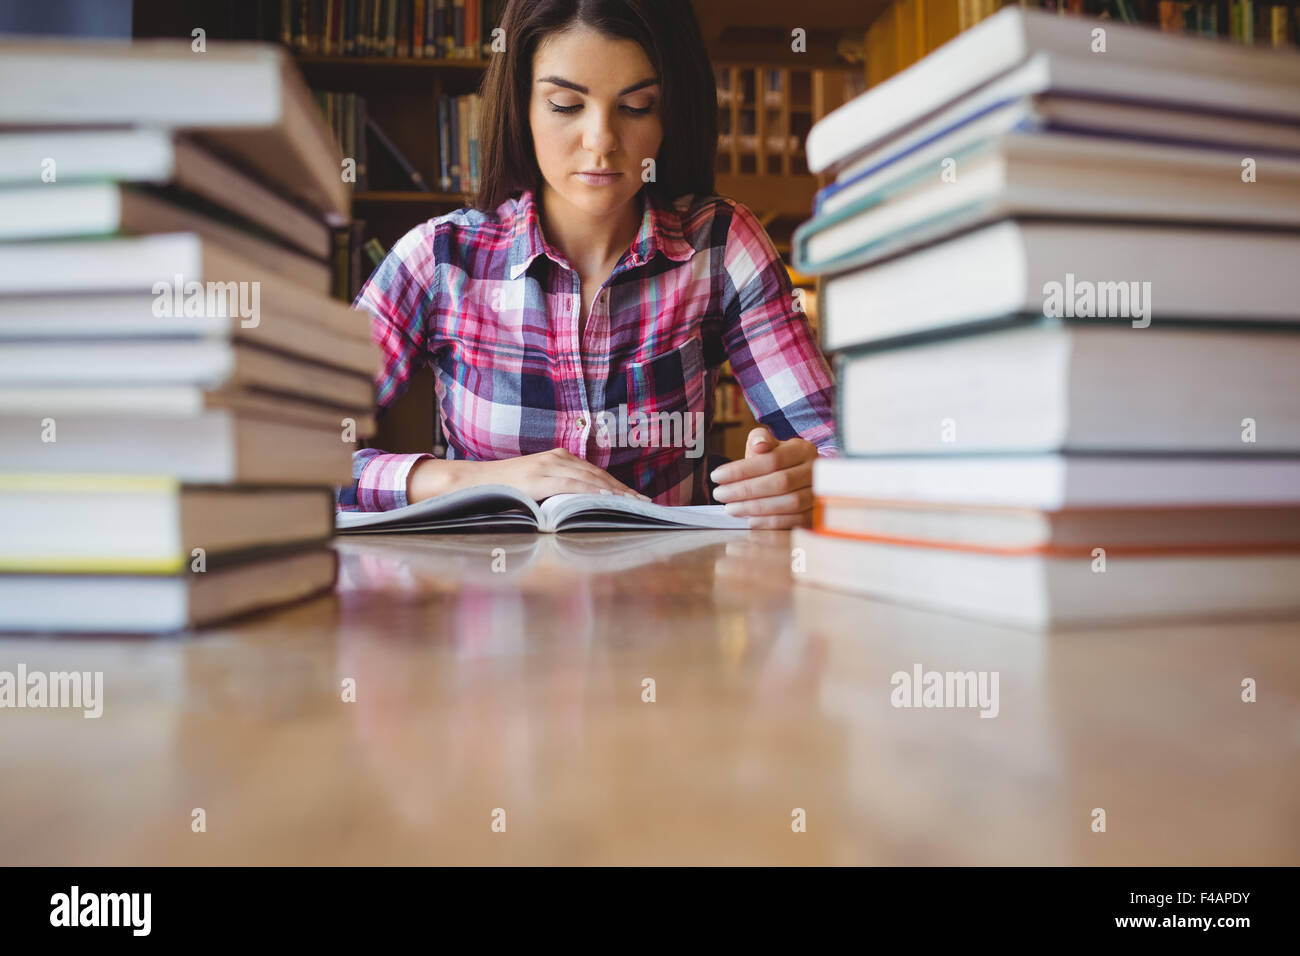 Concentrated female student studying at desk Stock Photo